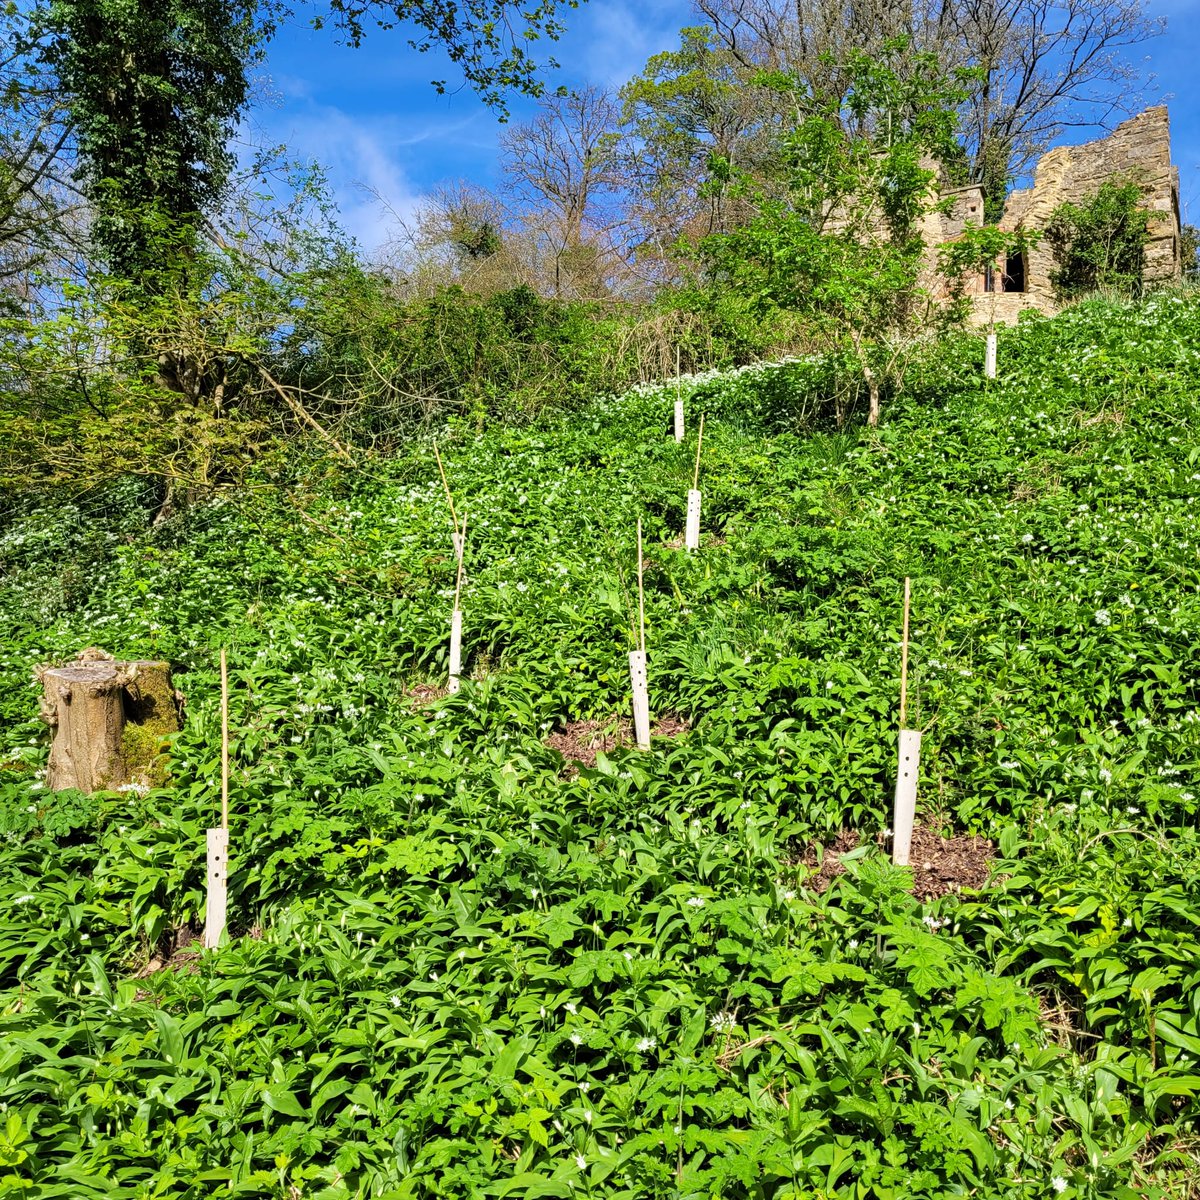 The whips planted by our garden team have already made great progress. #gardening #newtrees #wildgarlic